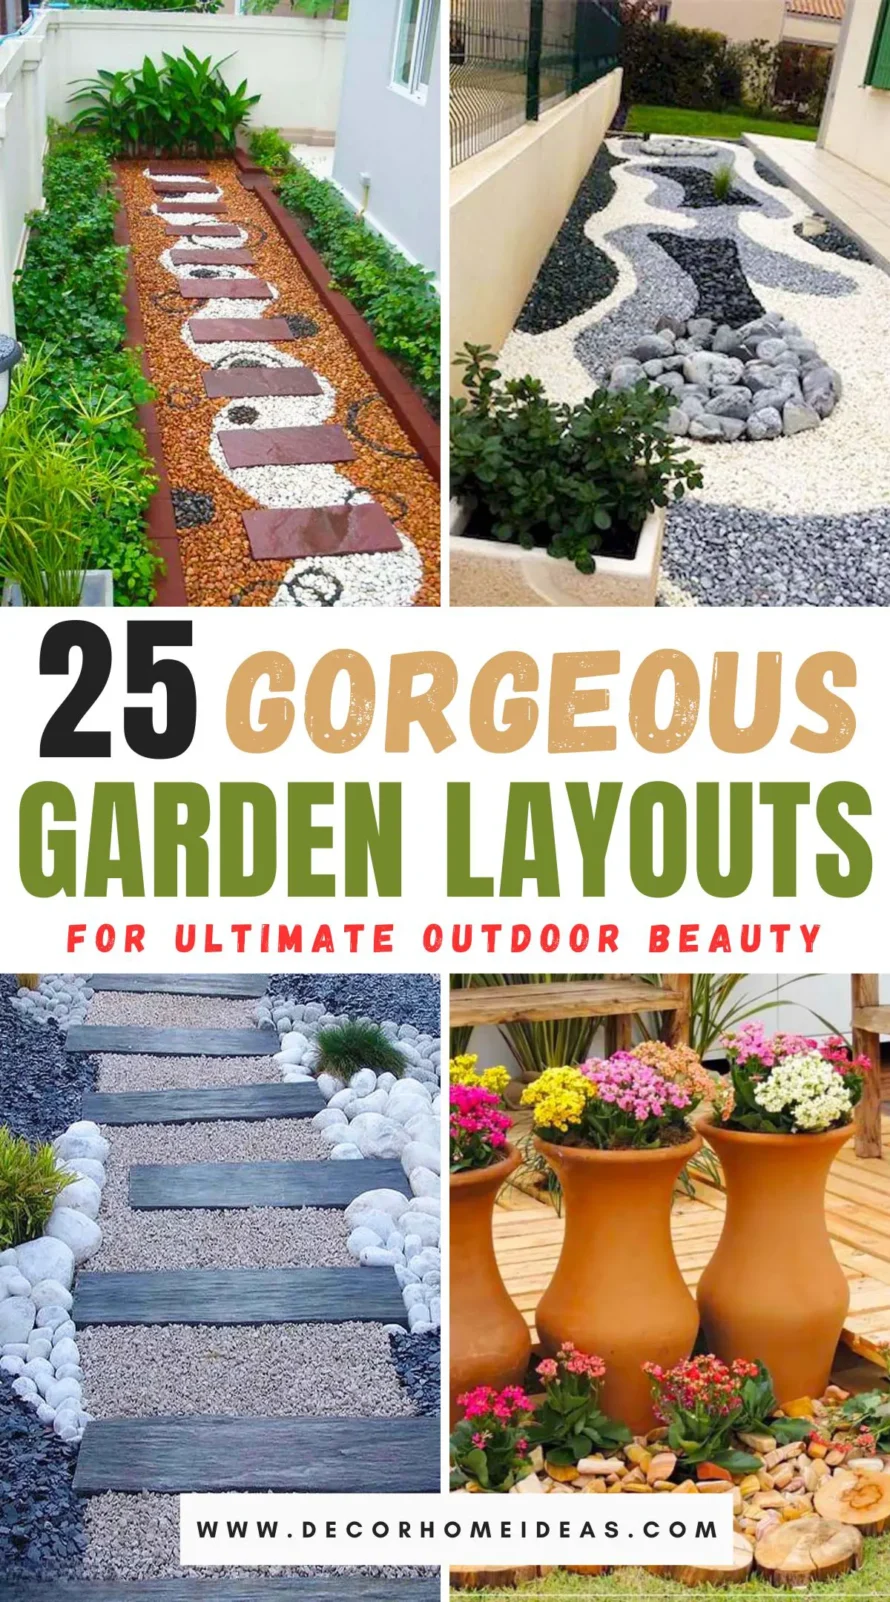 Explore 25 exquisite garden designs that will turn your backyard into a picturesque retreat. From serene water features to vibrant flower beds, these ideas promise a perfect blend of beauty and tranquility. Dive in to see how you can elevate your outdoor living space!